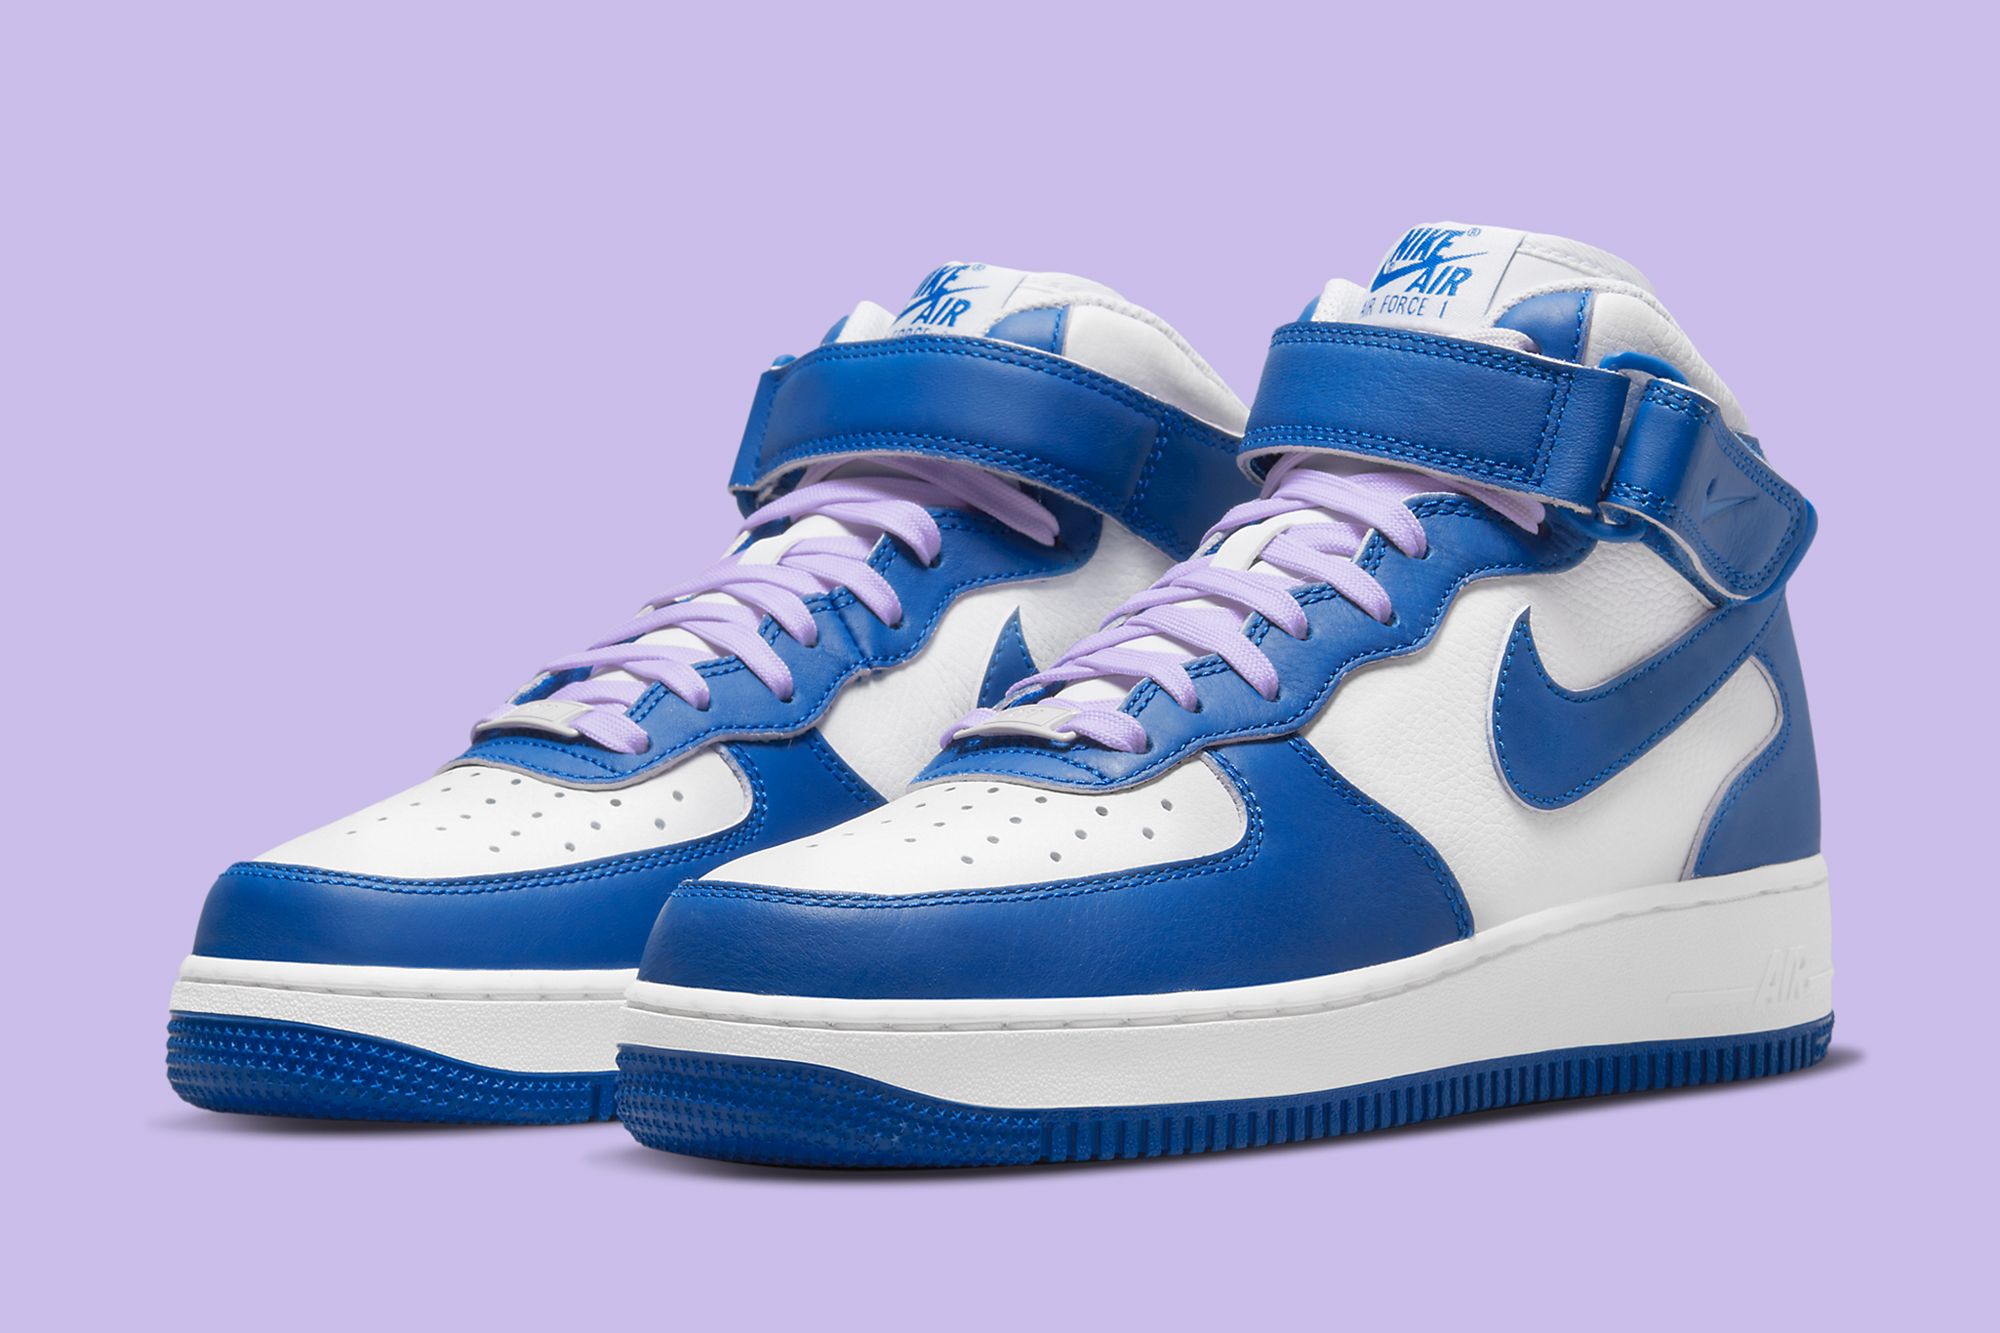 Nike Continue the 'Kentucky' Theme On This Air Force 1 Mid - Sneaker Freaker